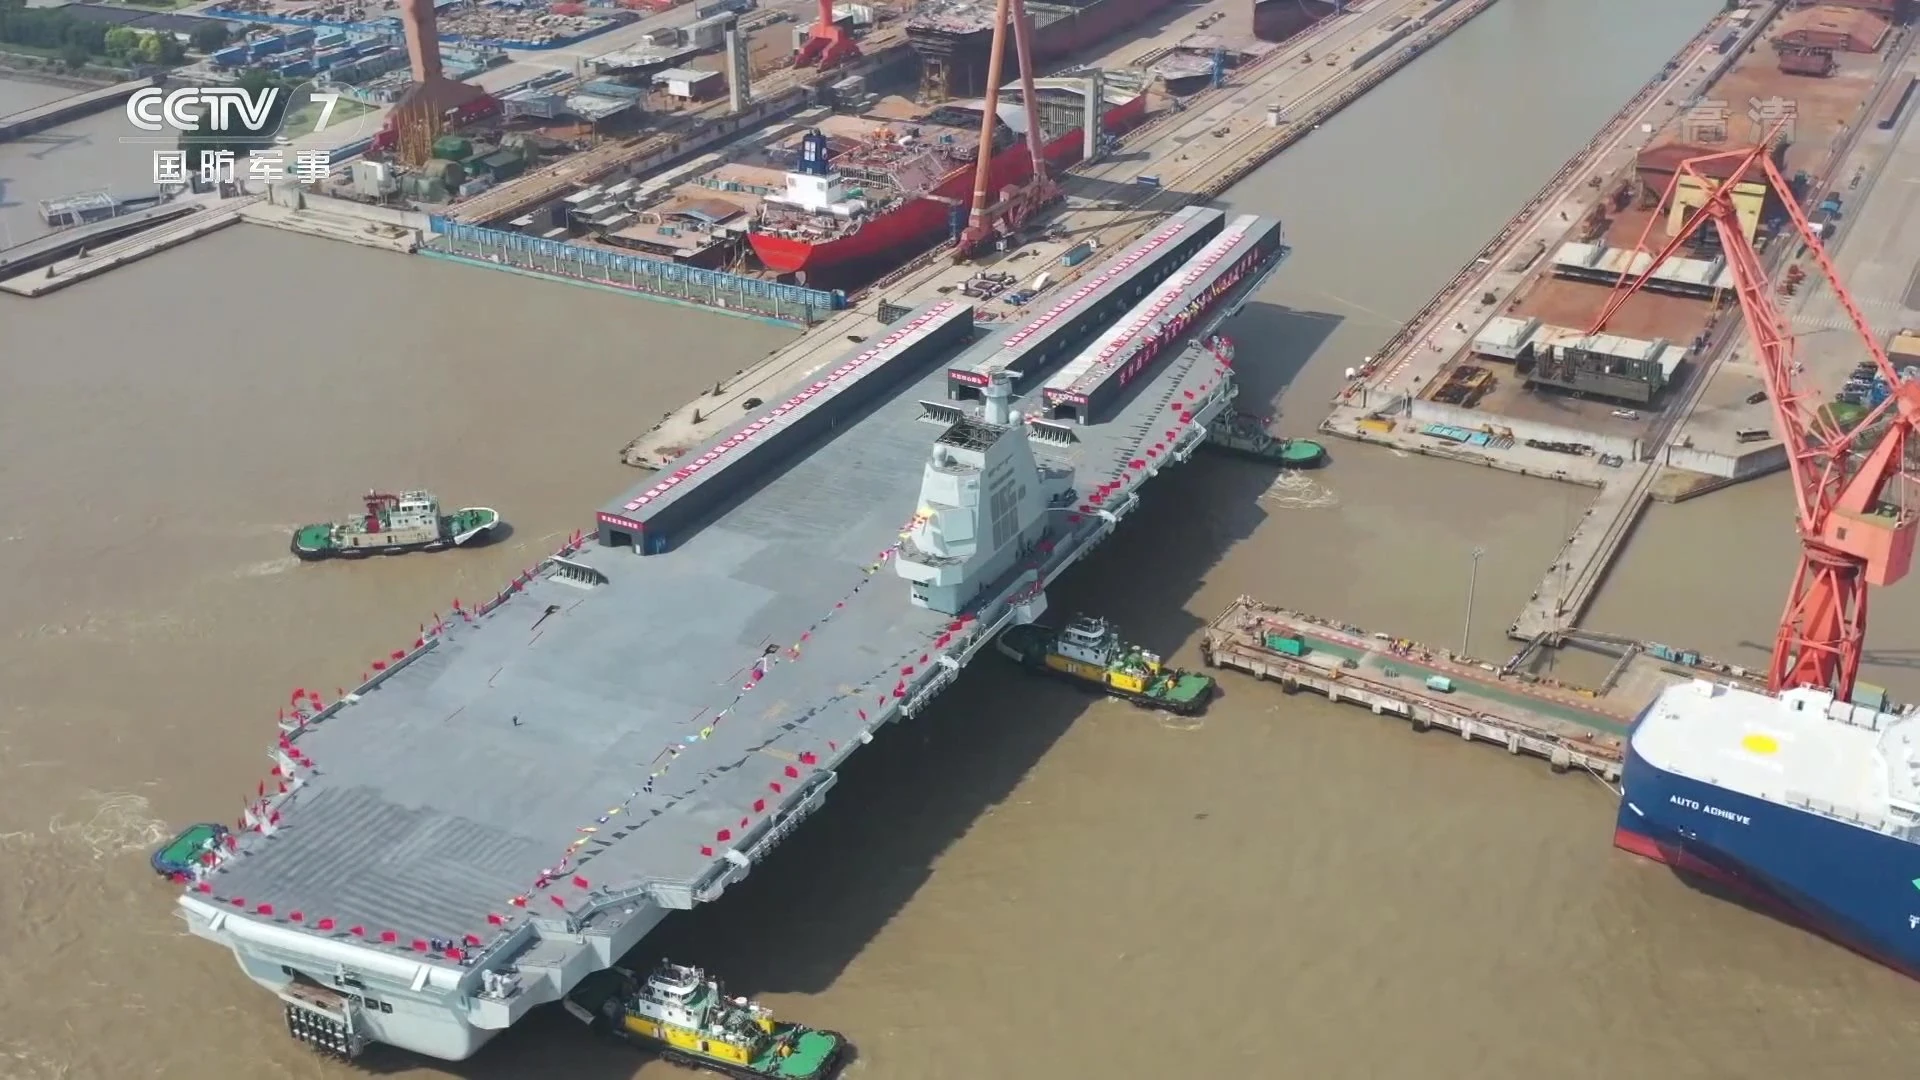 Does China’s Fujian Have What It Takes To Compete with USN Aircraft Carriers?